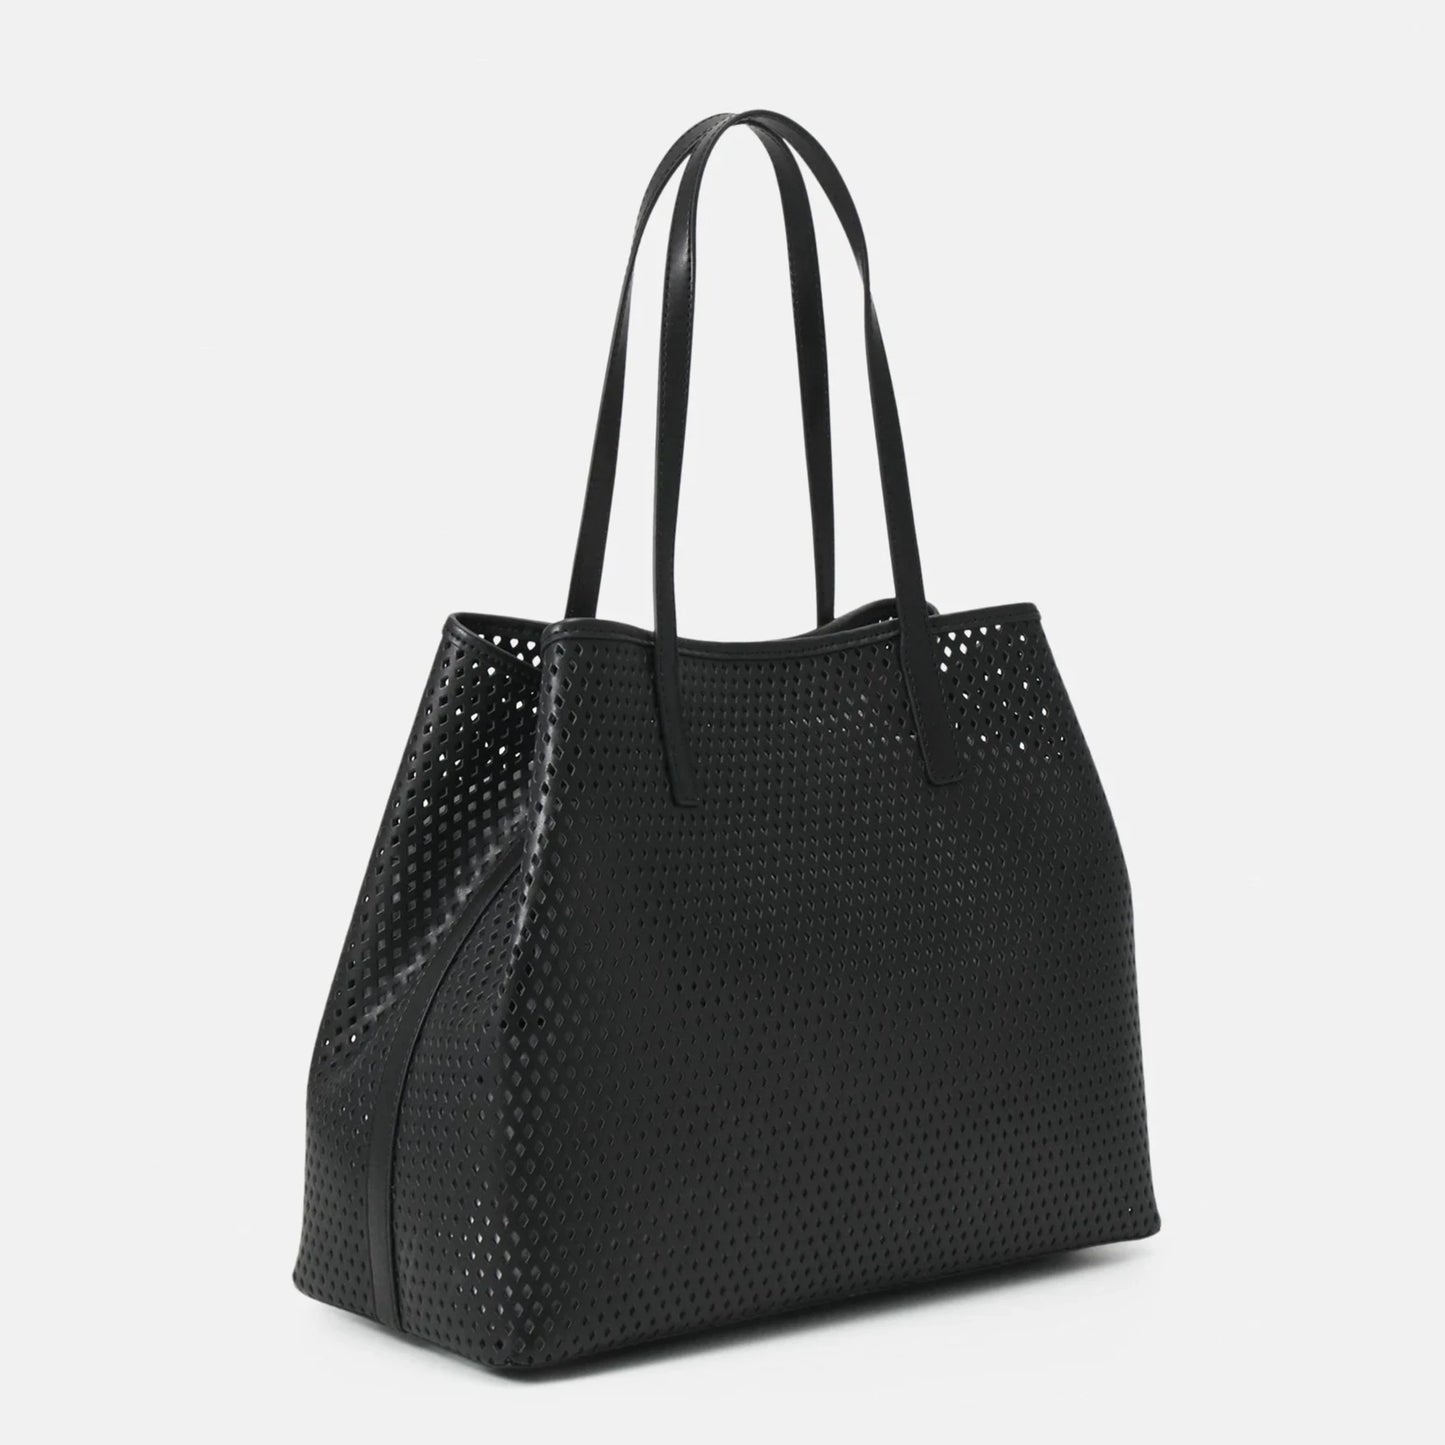 GUESS VIKKY TOTE BLACK – Sydney Luggage